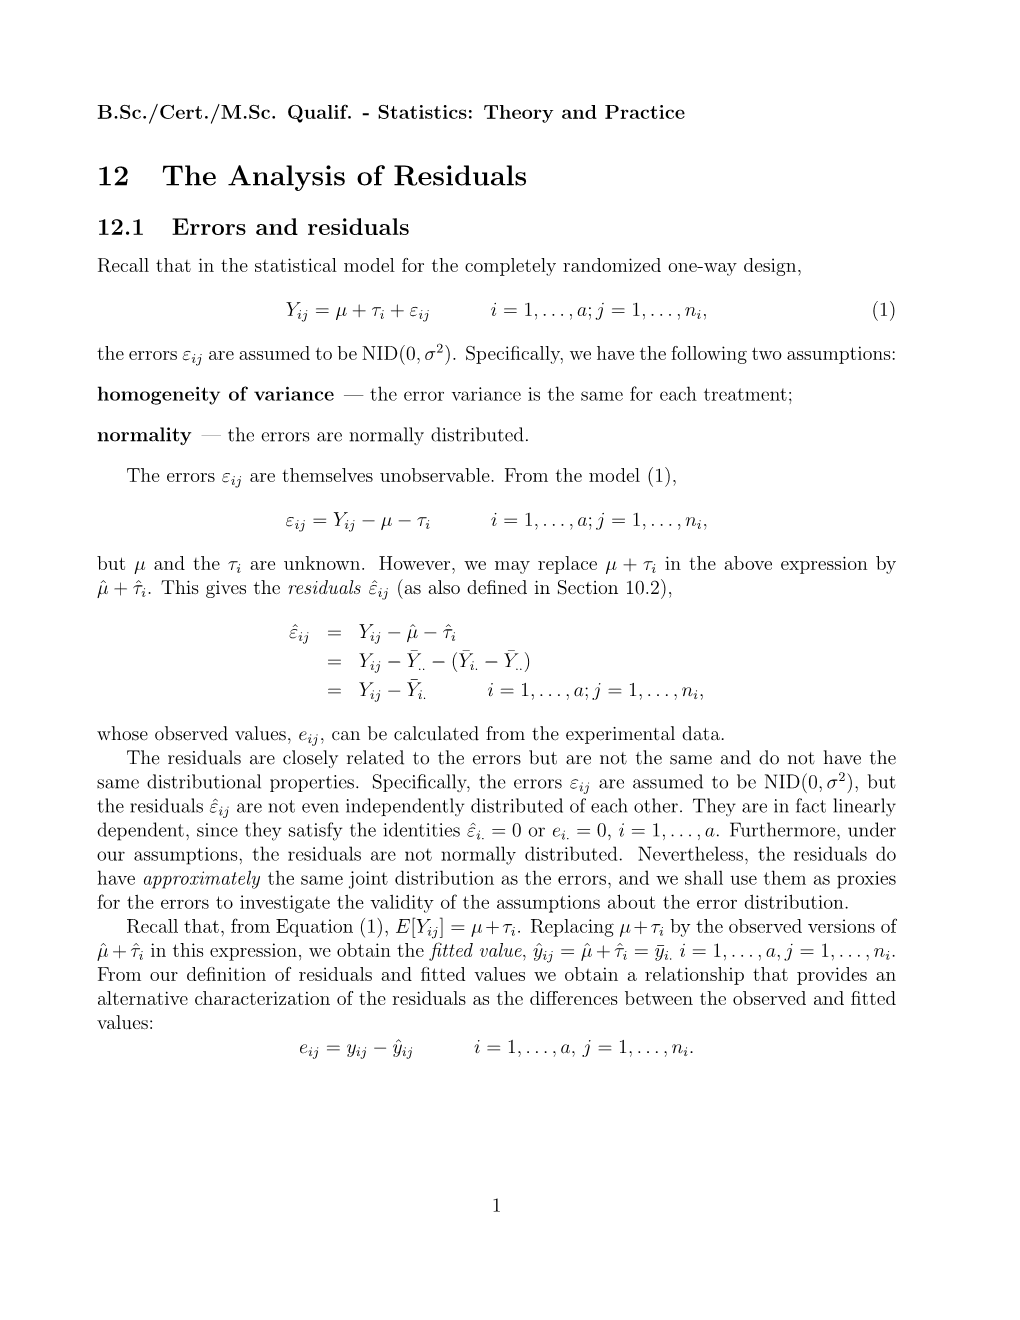 12 the Analysis of Residuals